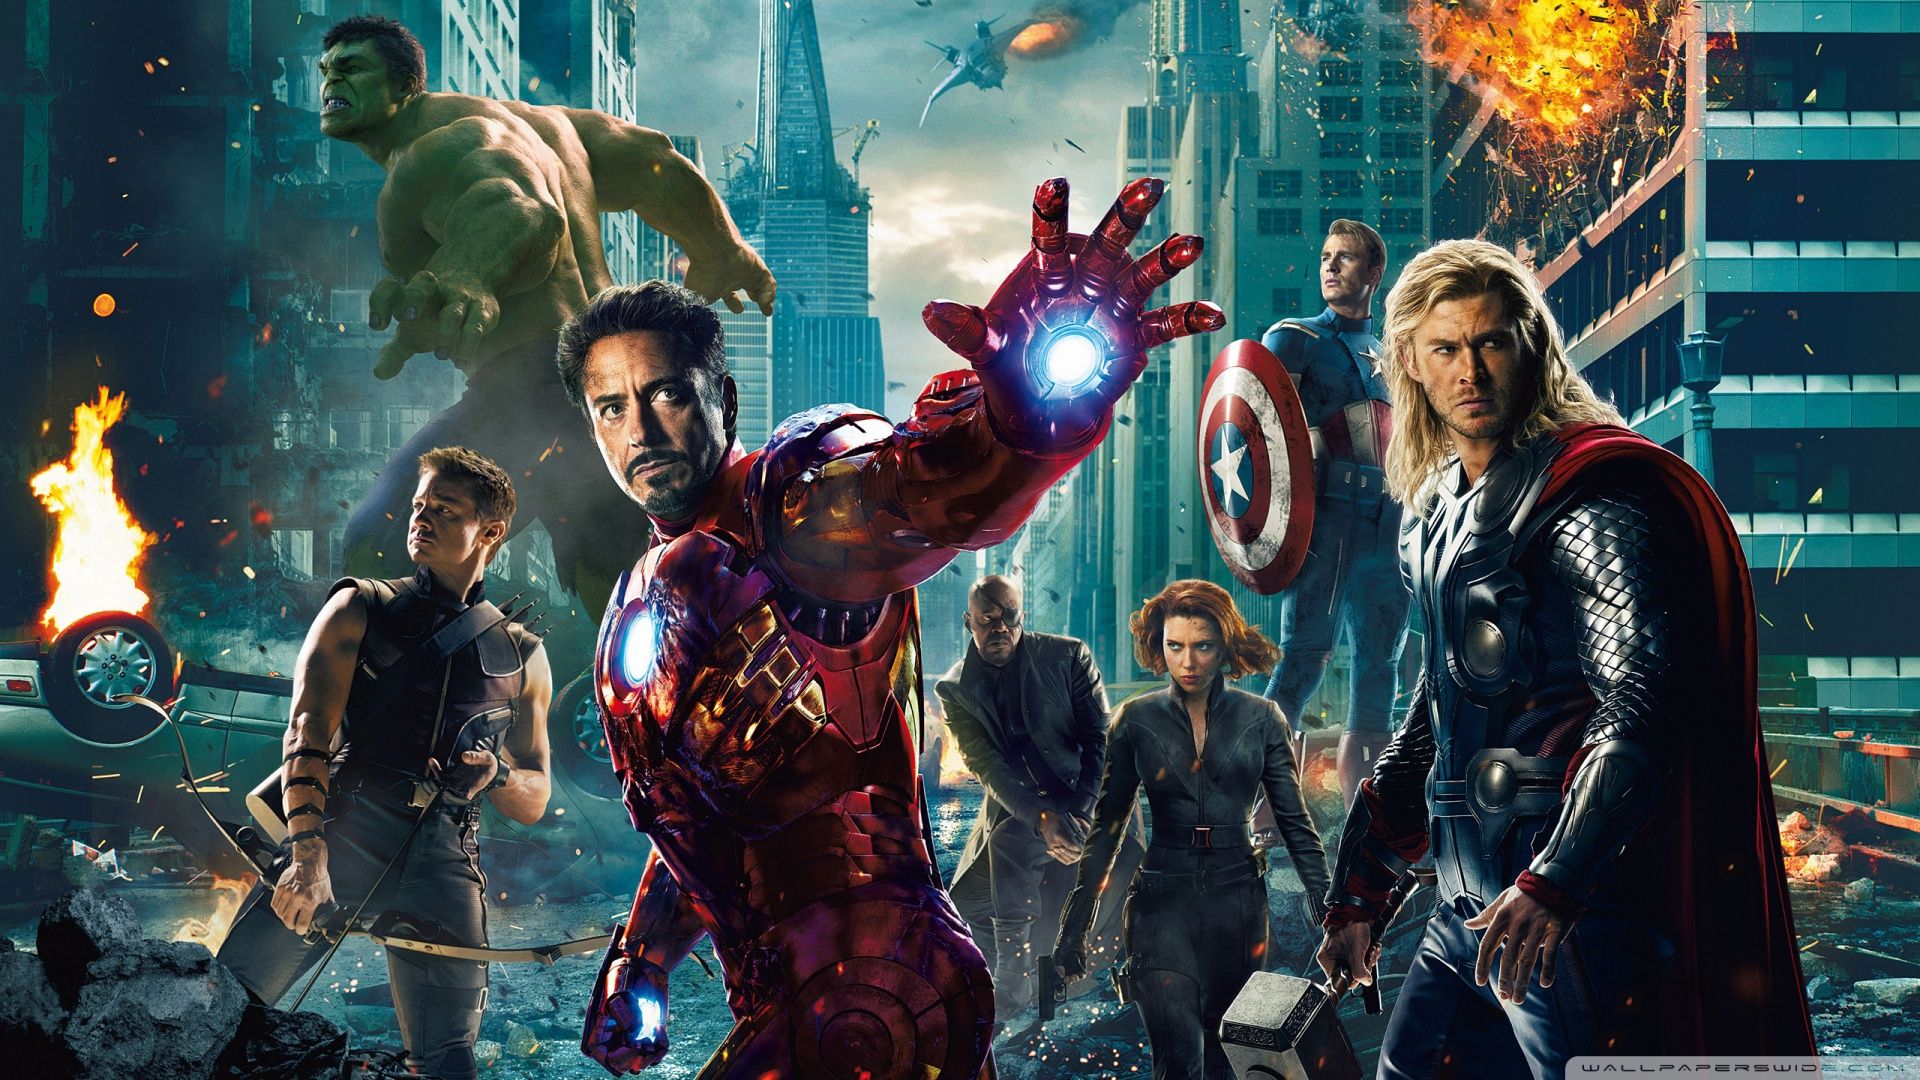 Free download Marvel Live action Movies image the avengers HD